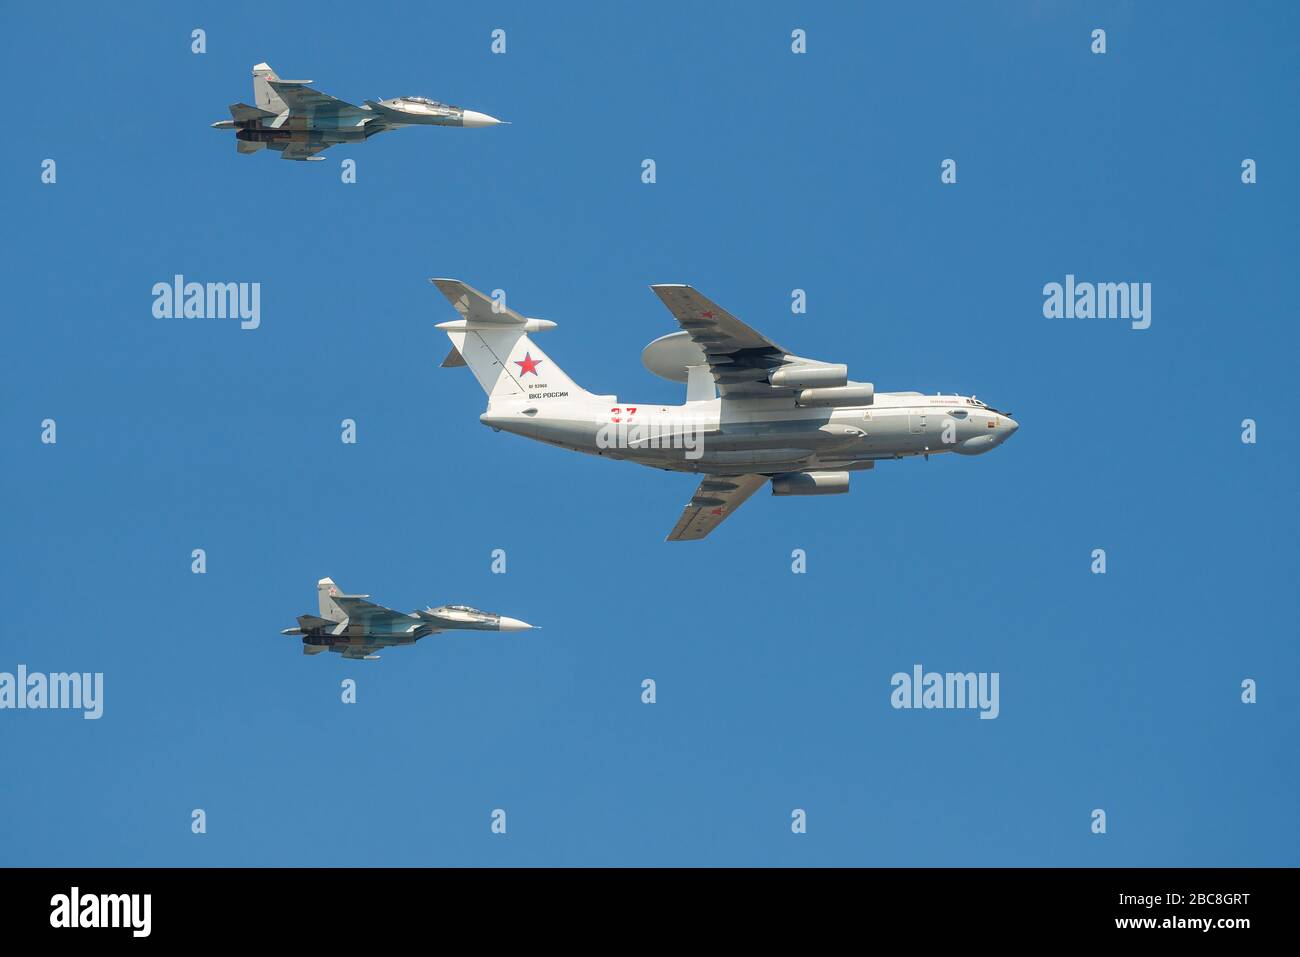 ST. PETERSBURG, RUSSIA - JULY 25, 2019: Aircraft A-50 'Liska' (RF-93966), accompanied by two Su-30SM multirole fighters. Fragment of a military parade Stock Photo